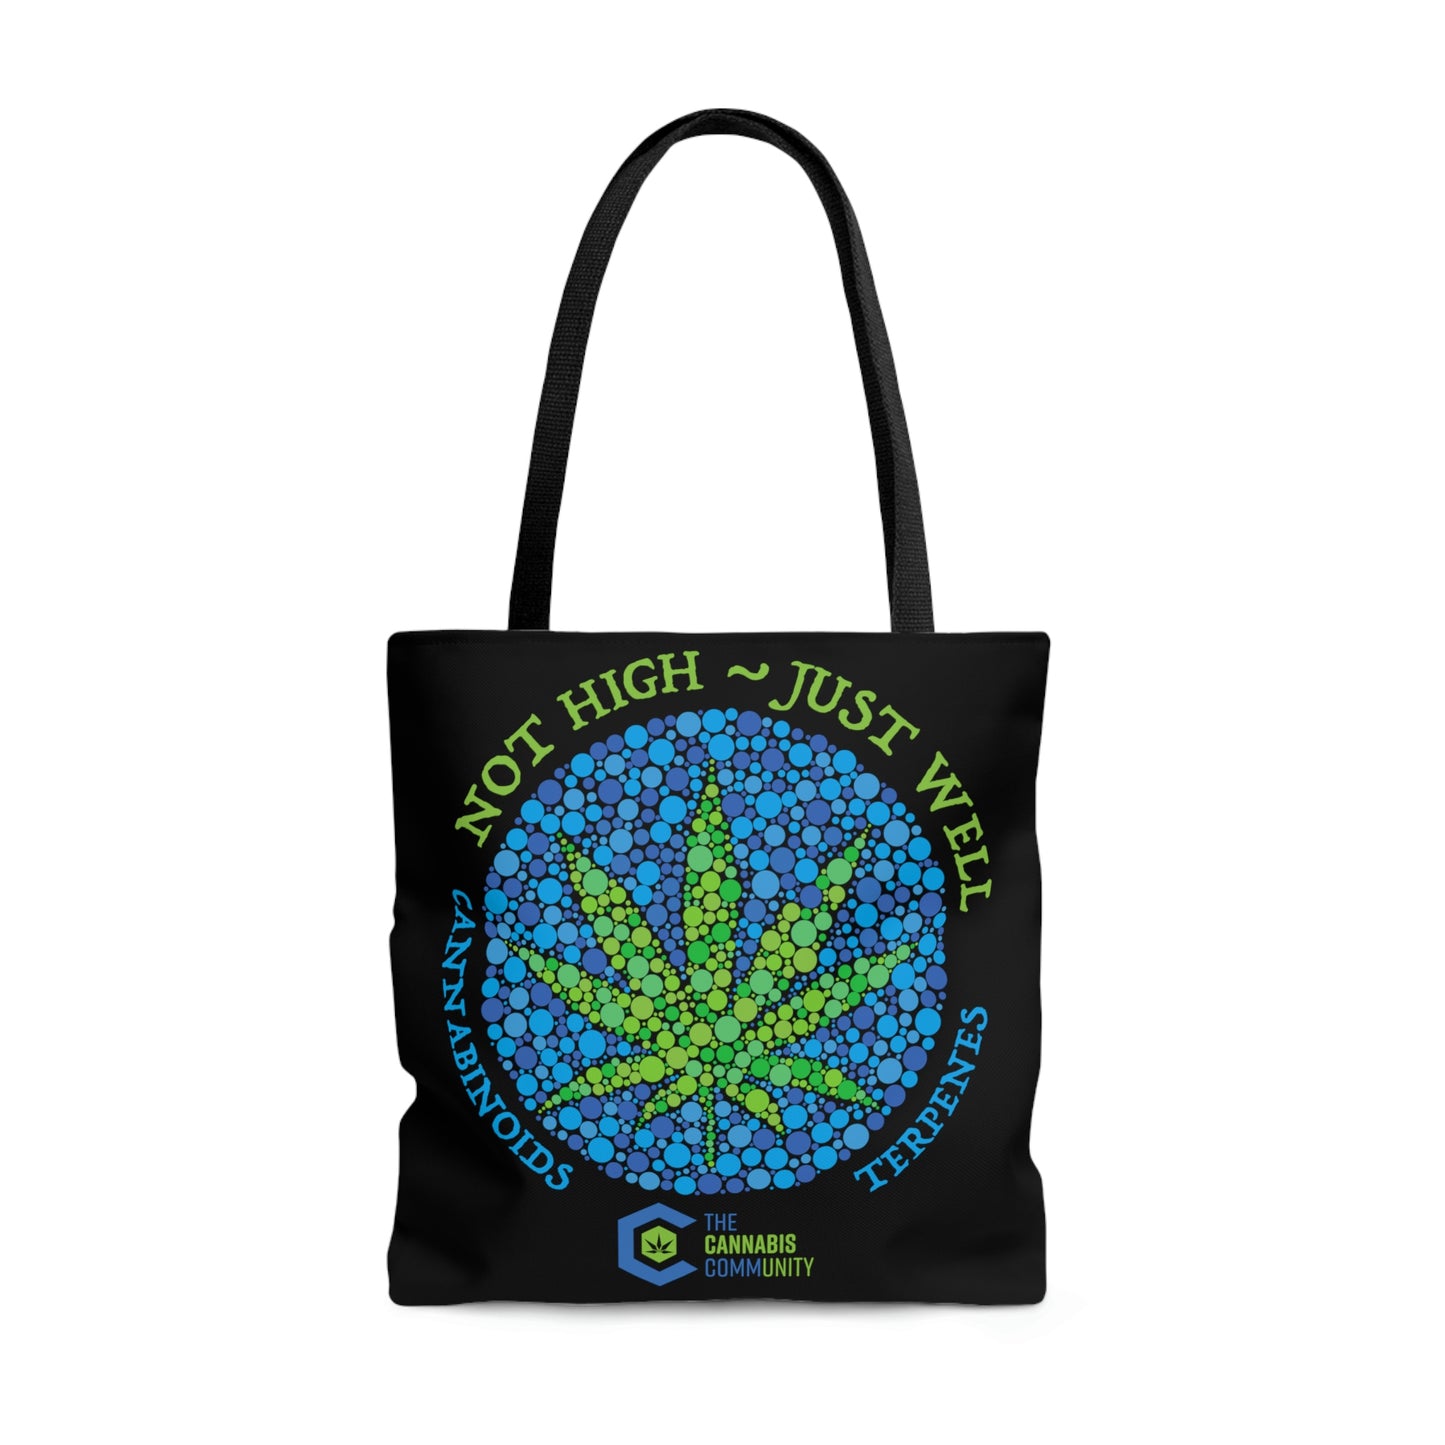 A mosaic design of a cannabis leaf is placed well with a blue mosaic background in the center of the Not High, Just Well Medical Cannabis Tote Bag